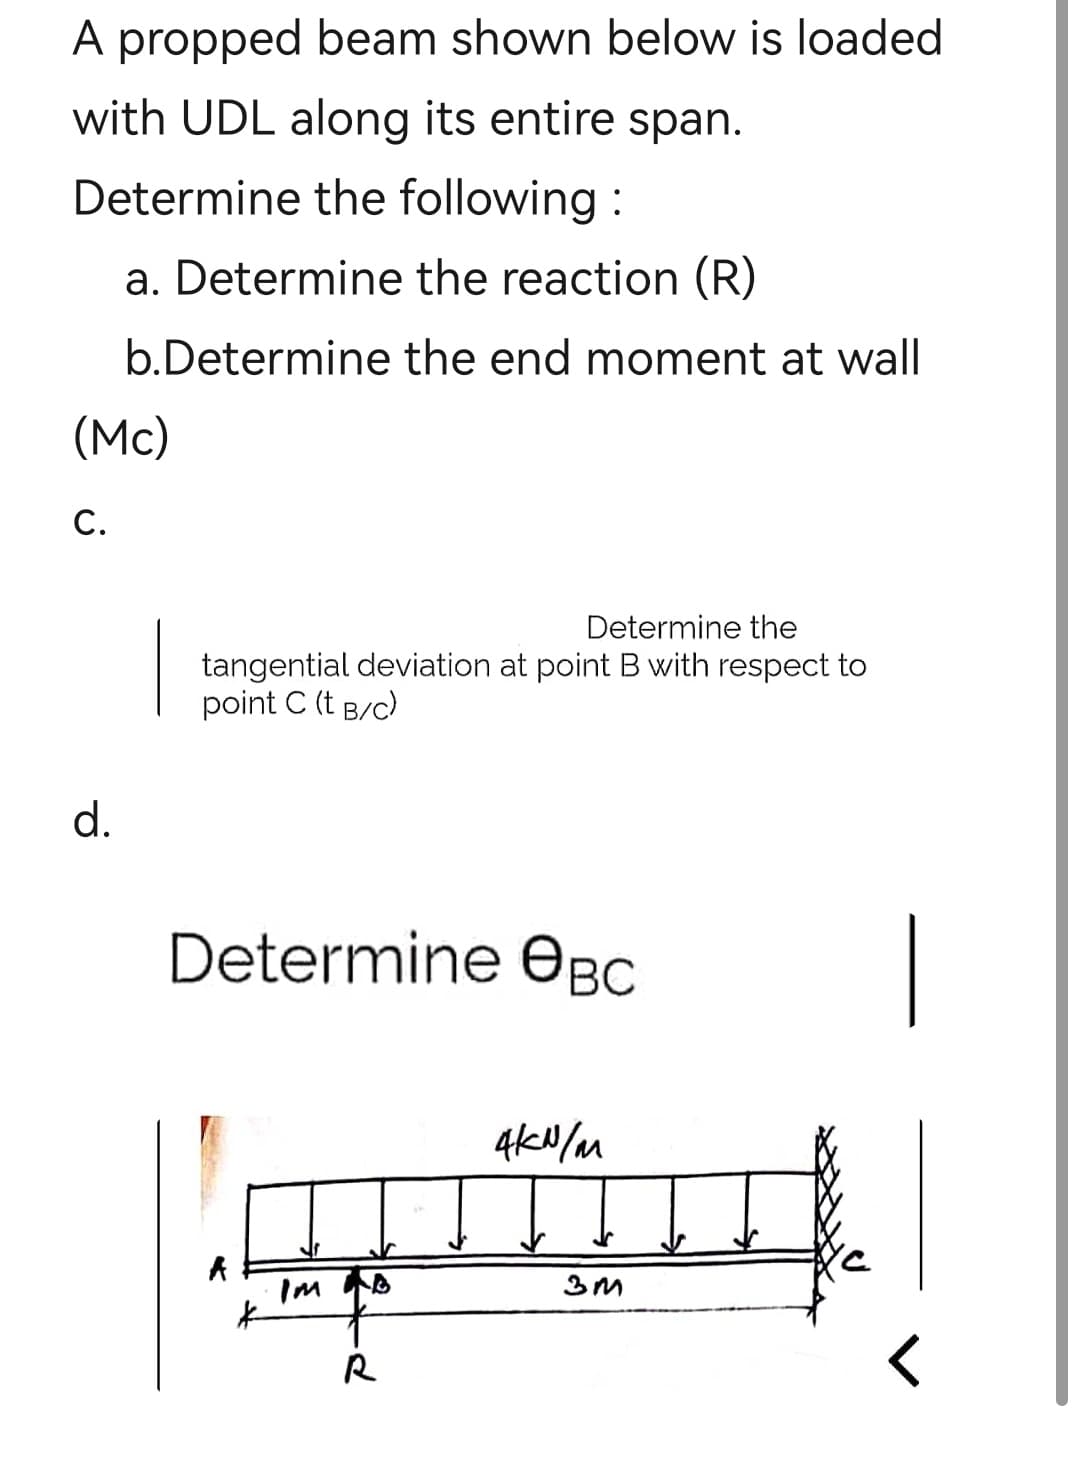 A propped beam shown below is loaded
with UDL along its entire span.
Determine the following:
(Mc)
C.
a. Determine the reaction (R)
b.Determine the end moment at wall
d.
Determine the
tangential deviation at point B with respect to
point C (t B/C)
Determine Өвс
A
*
R
4kN/m
3M